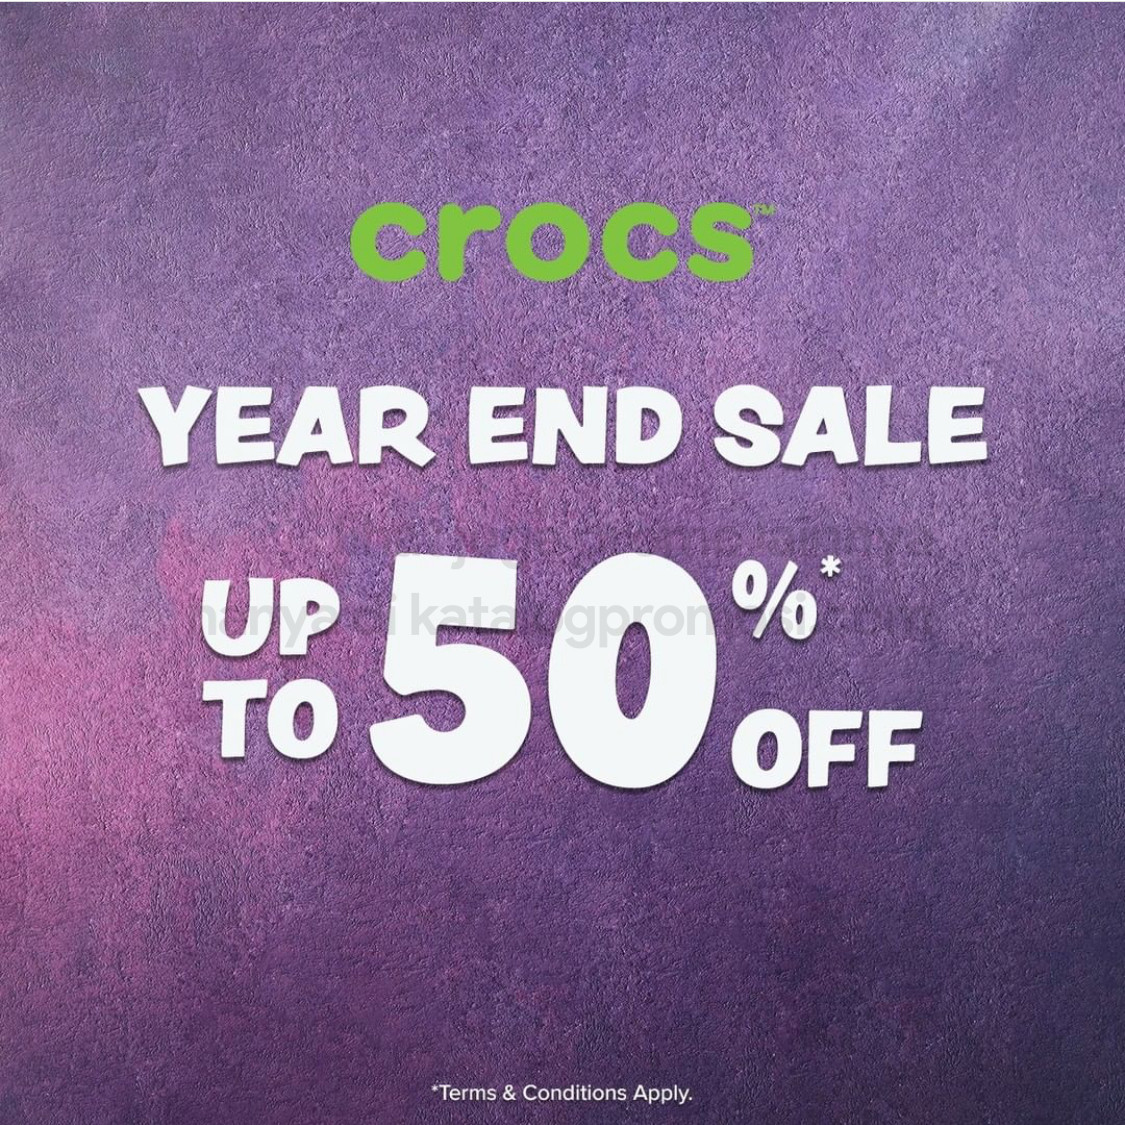 Promo CROCS YEAR END SALE - DISCOUNT up to 50% off